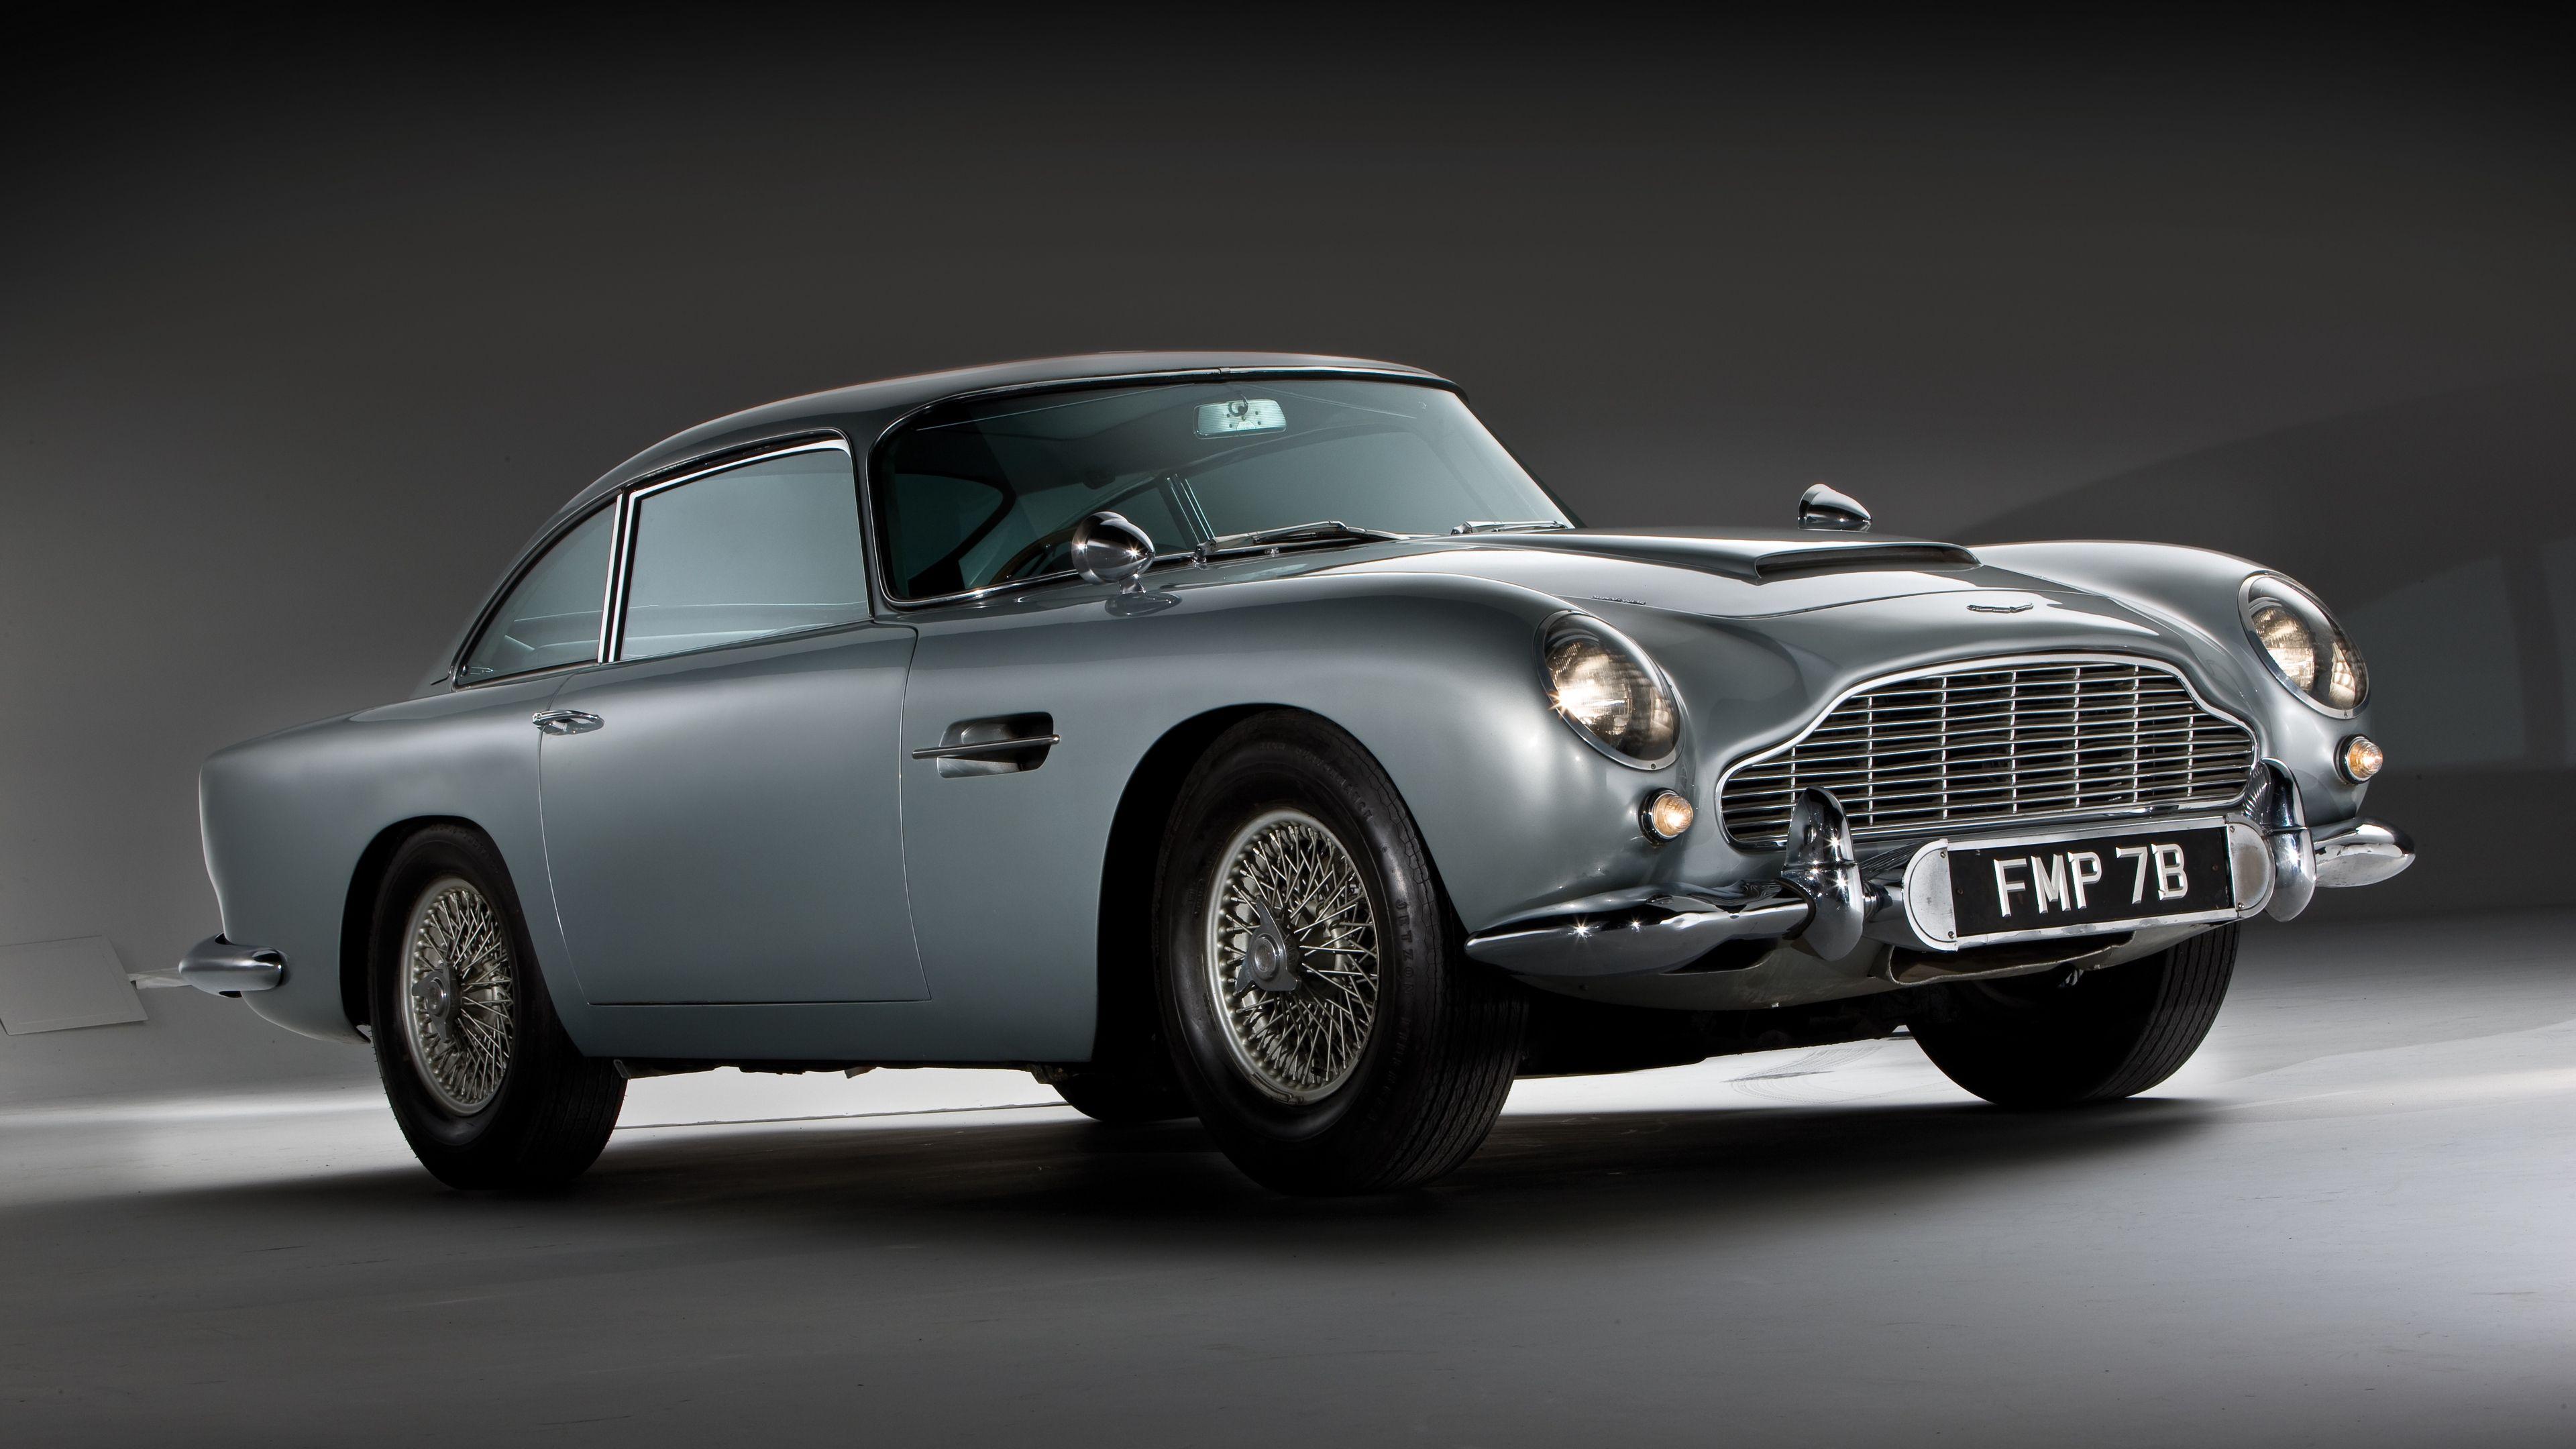 4k Db5 Wallpapers Top Free 4k Db5 Backgrounds Wallpaperaccess